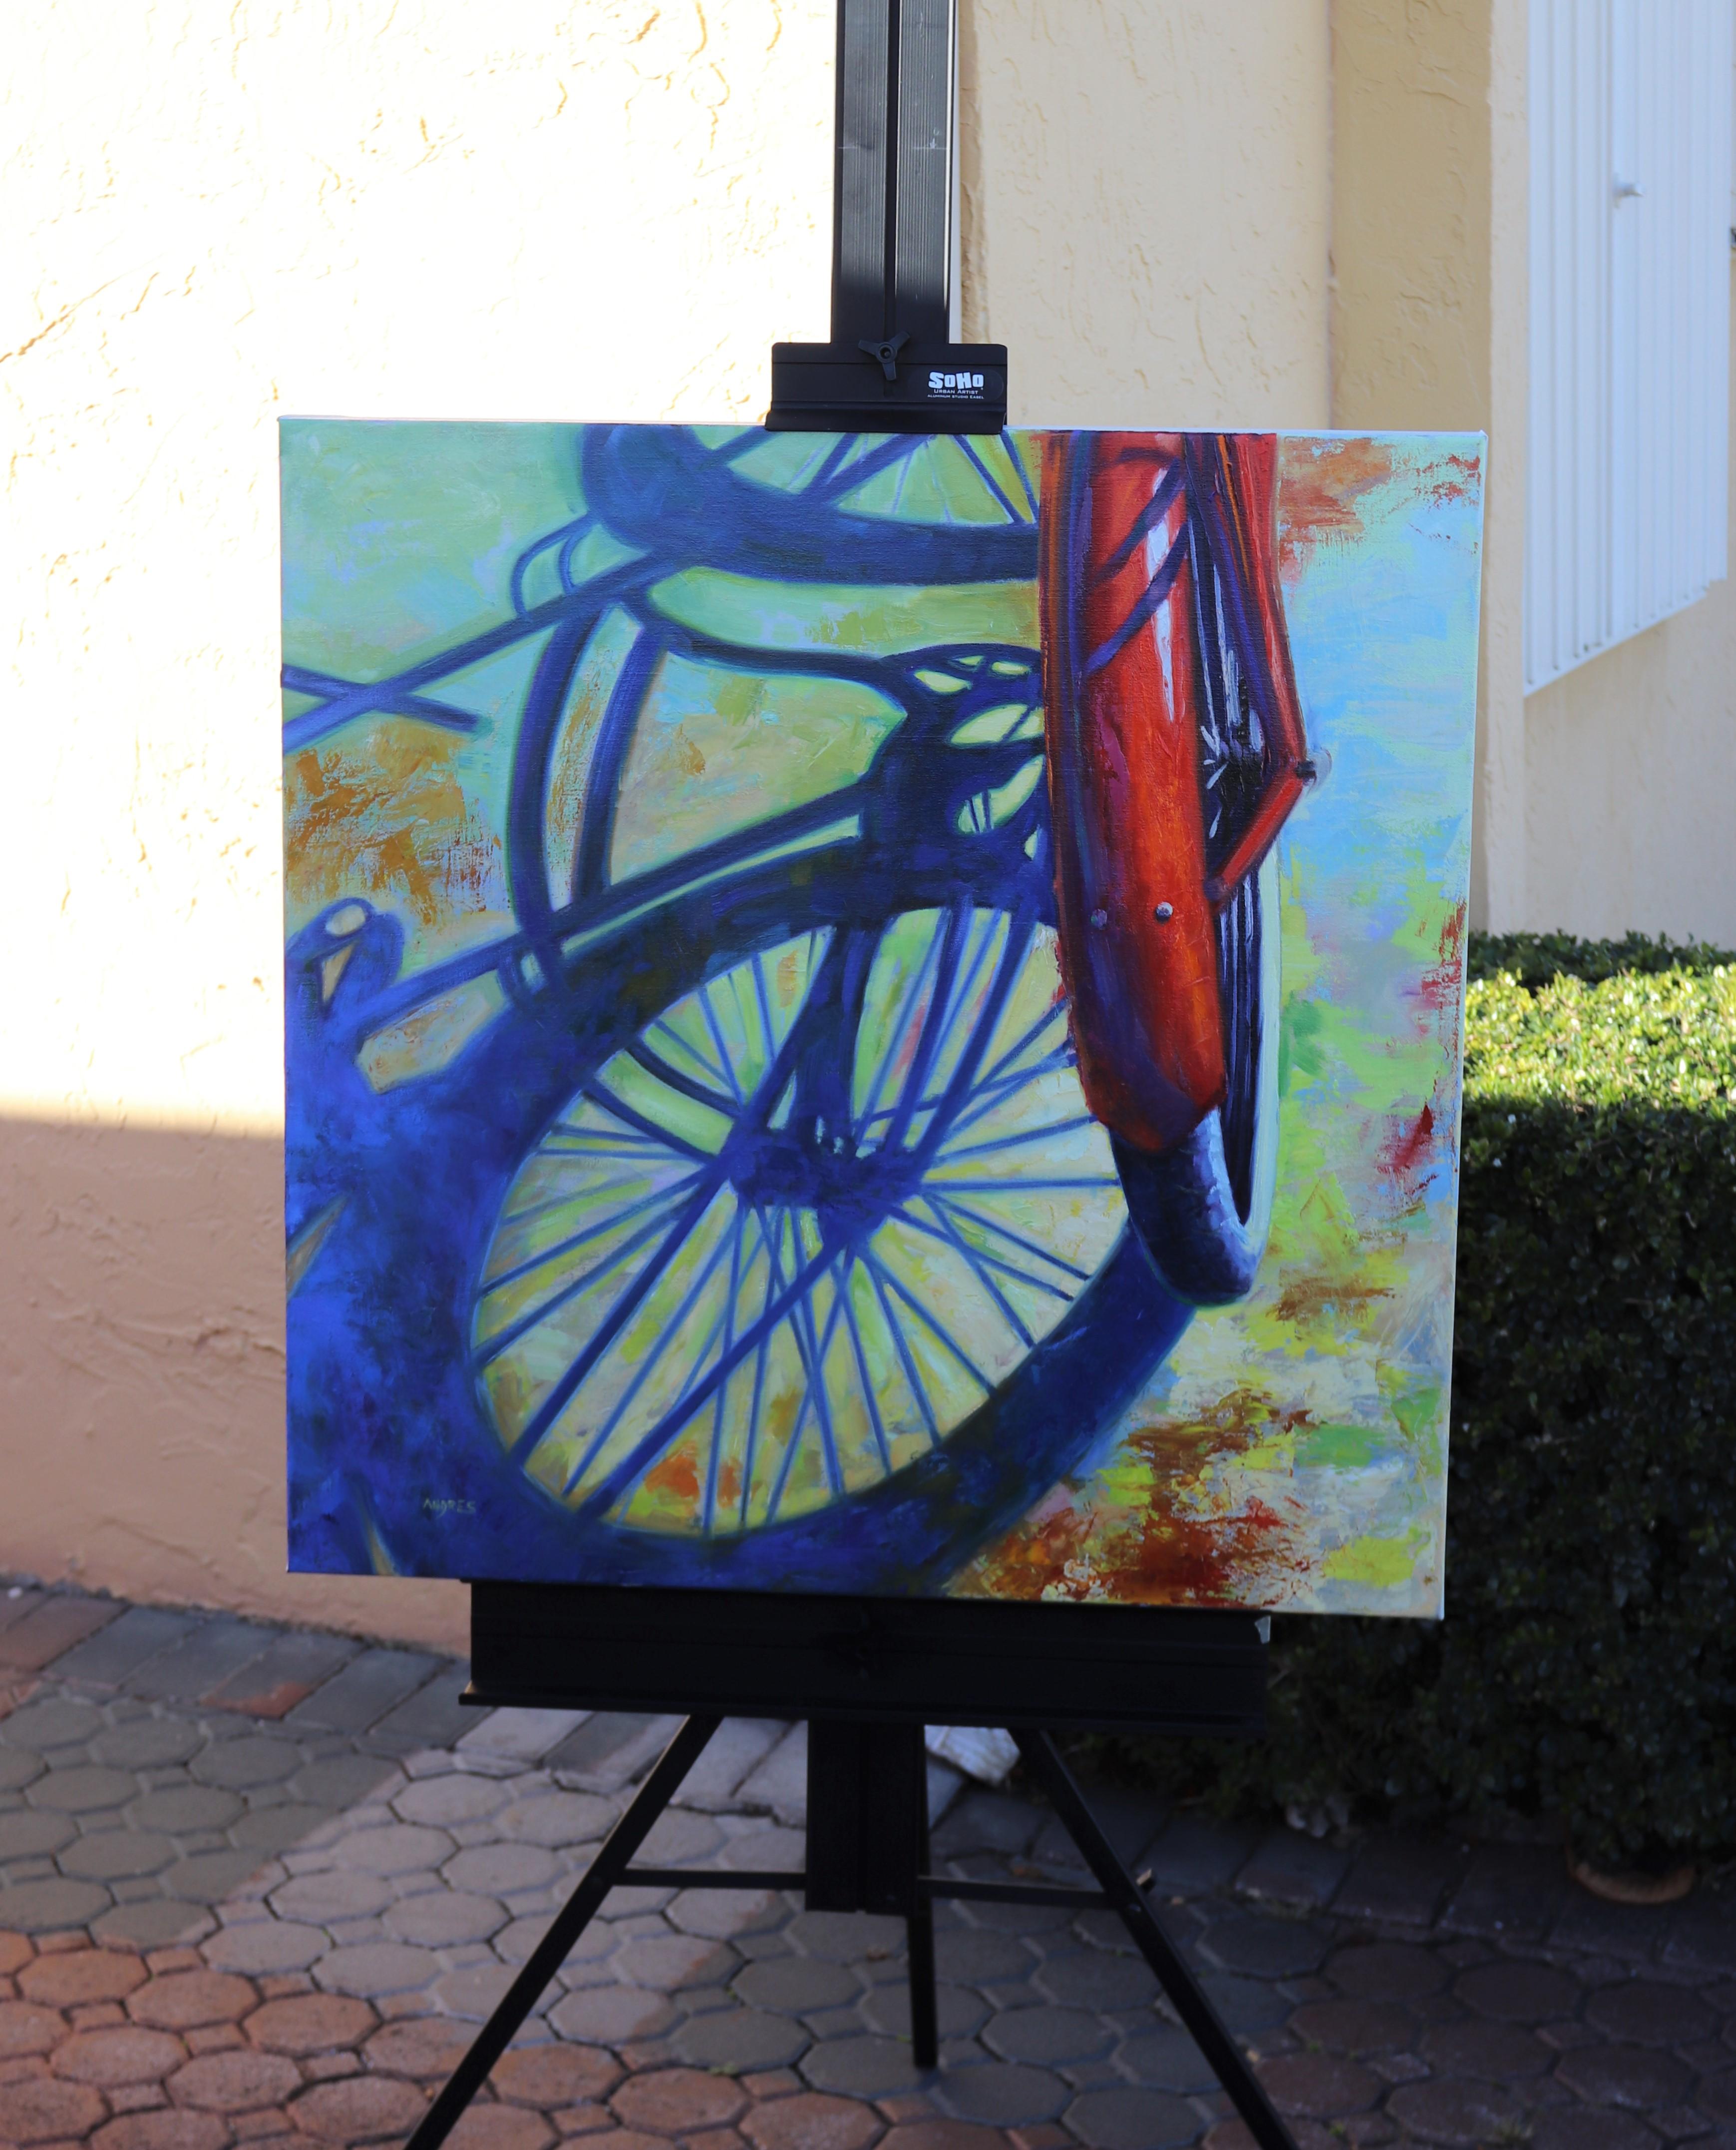 <p>Artist Comments<br>Artist Andres Lopez presents a still of a red bicycle casting a long silhouette on the ground. 